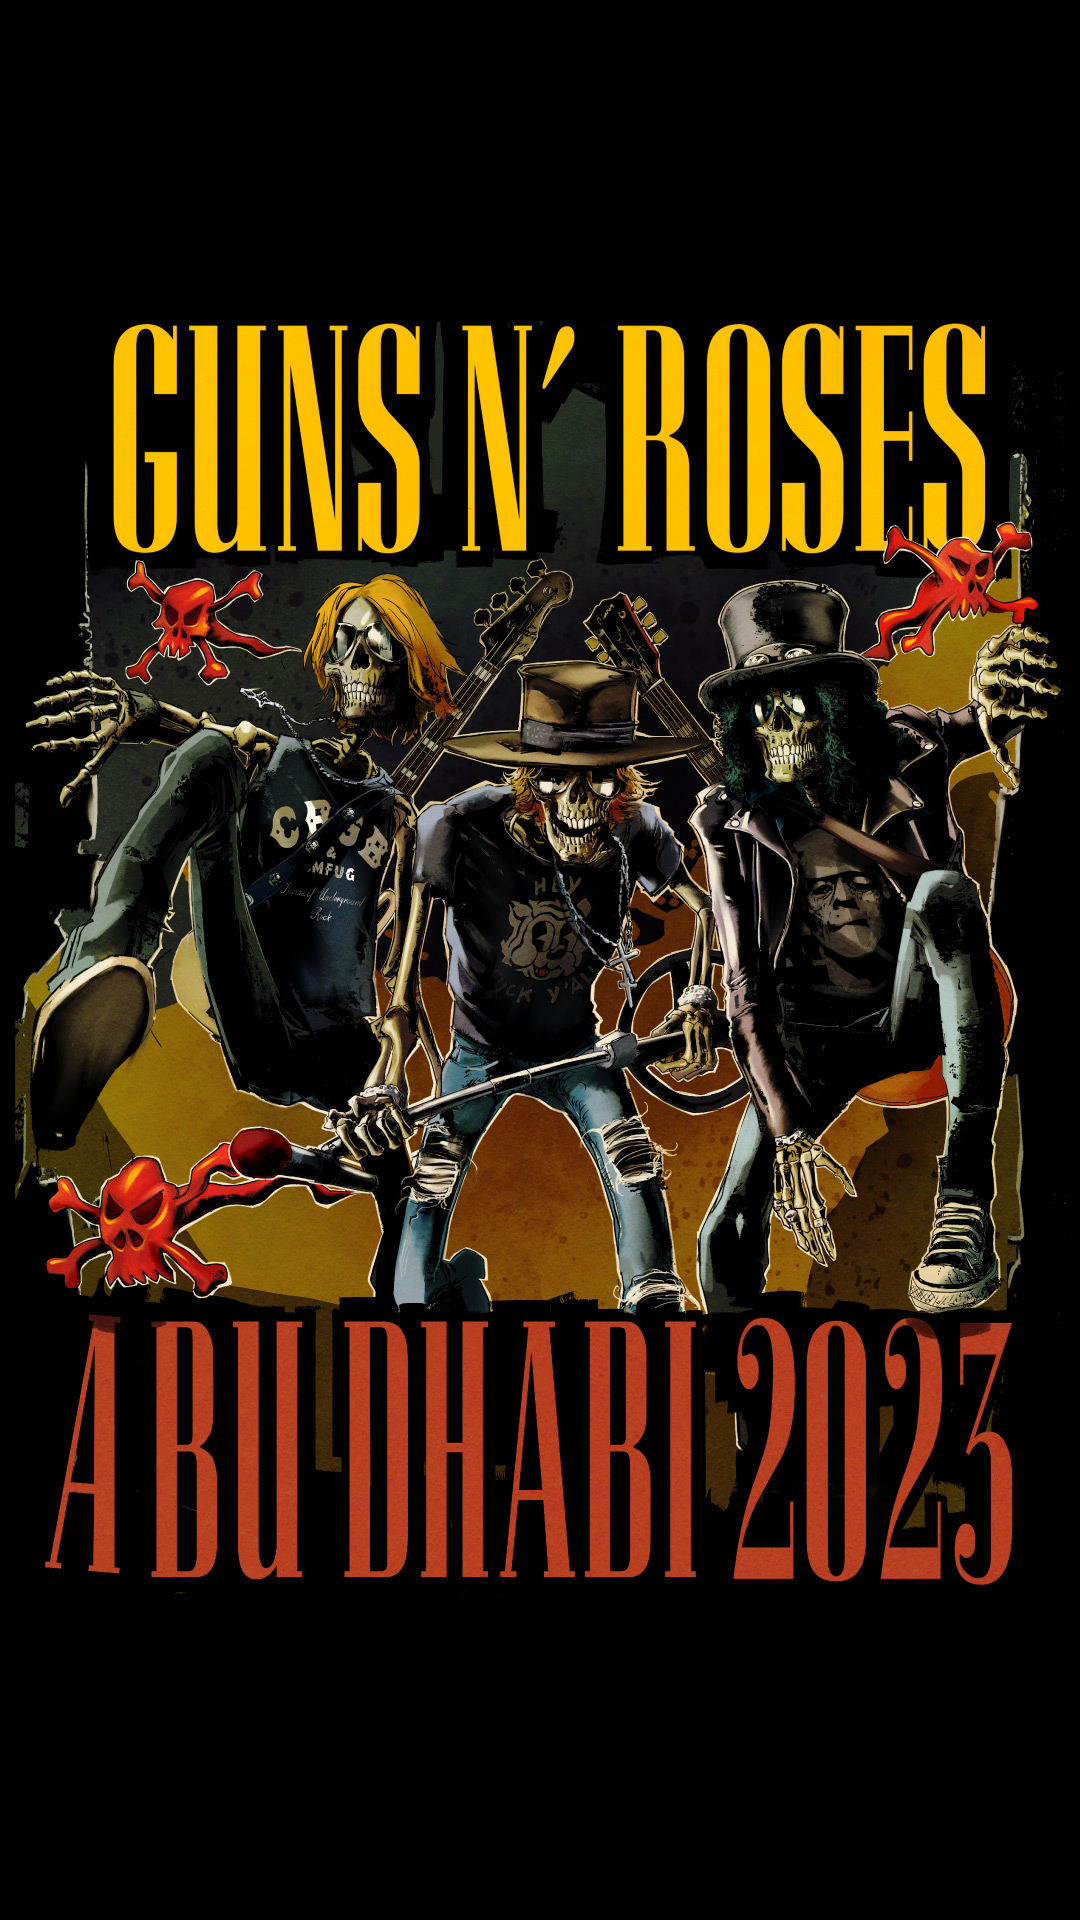 Yas Island Abu Dhabi Announces Two Exciting Offers To Enjoy Guns N’ Roses’ Live Performance At Etihad Arena On June 1